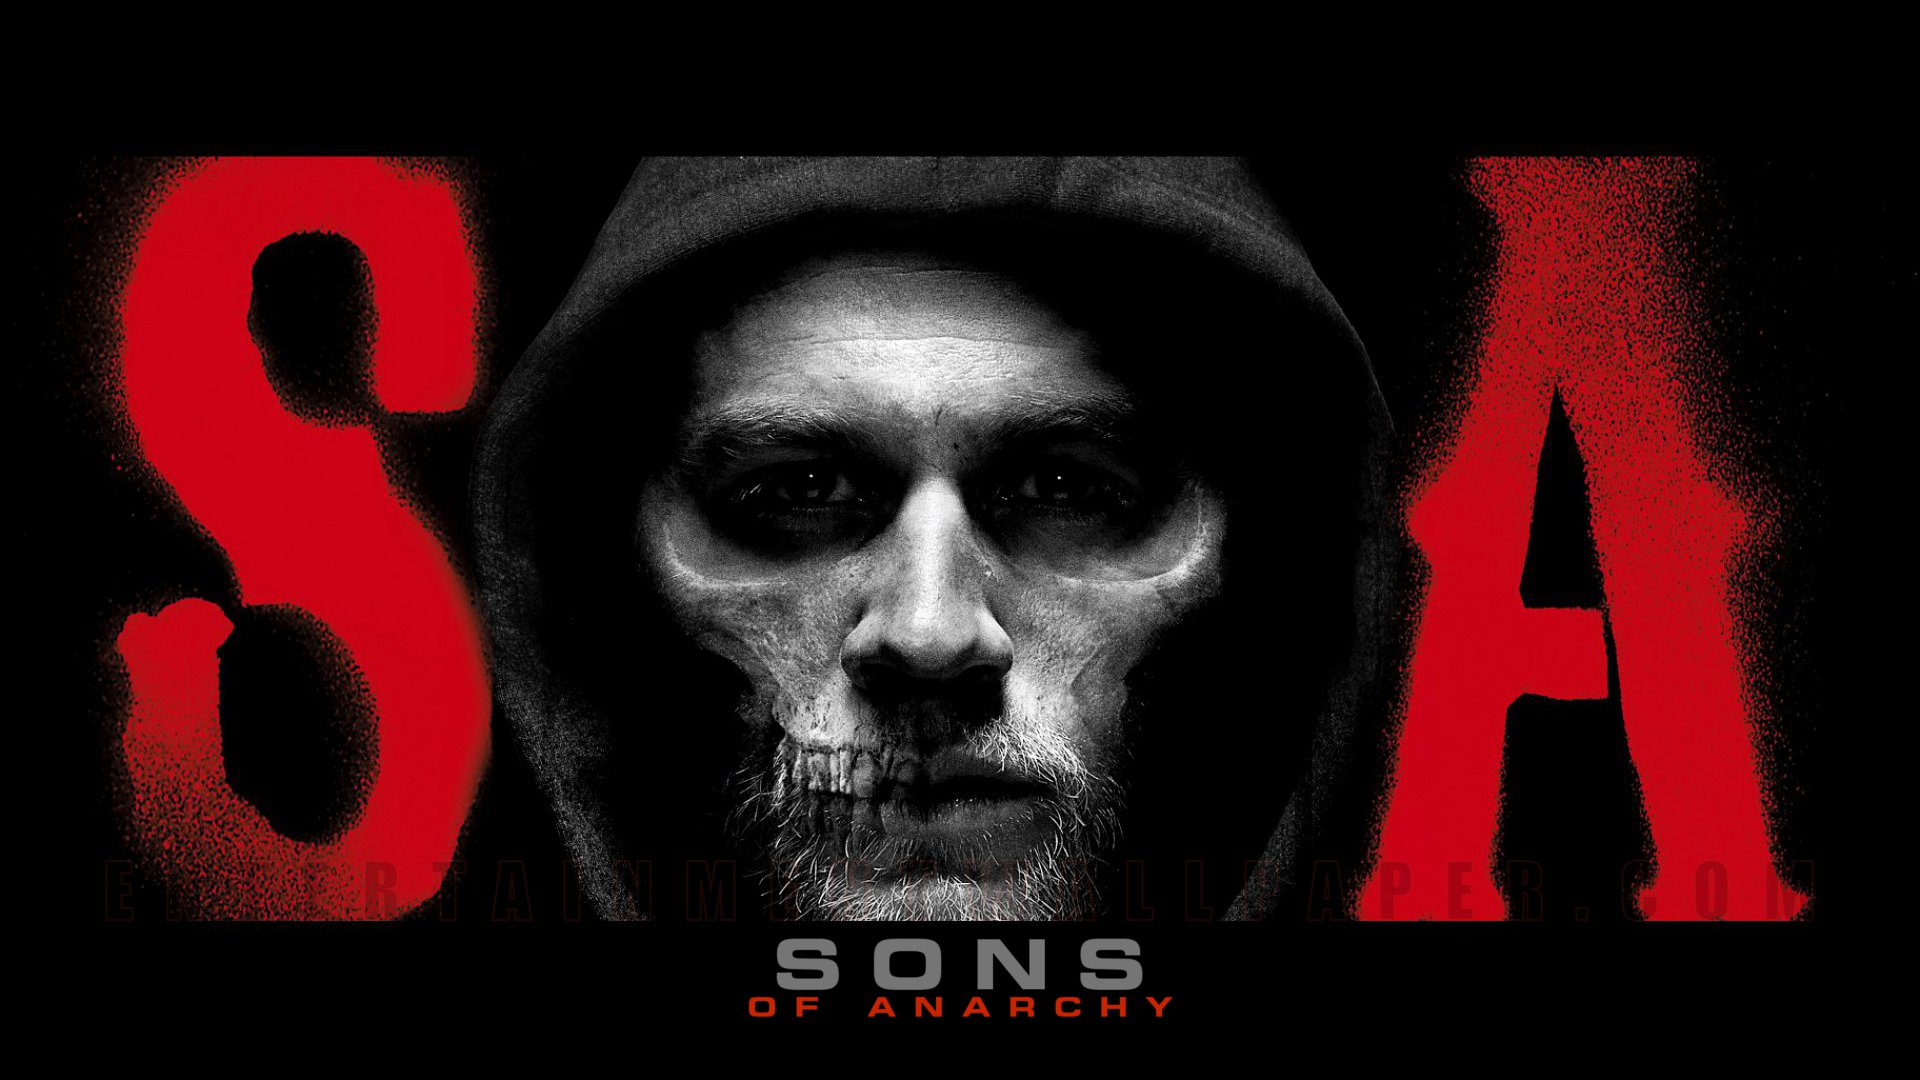 Sons of anarchy wallpapers stay1016 staywallpaper